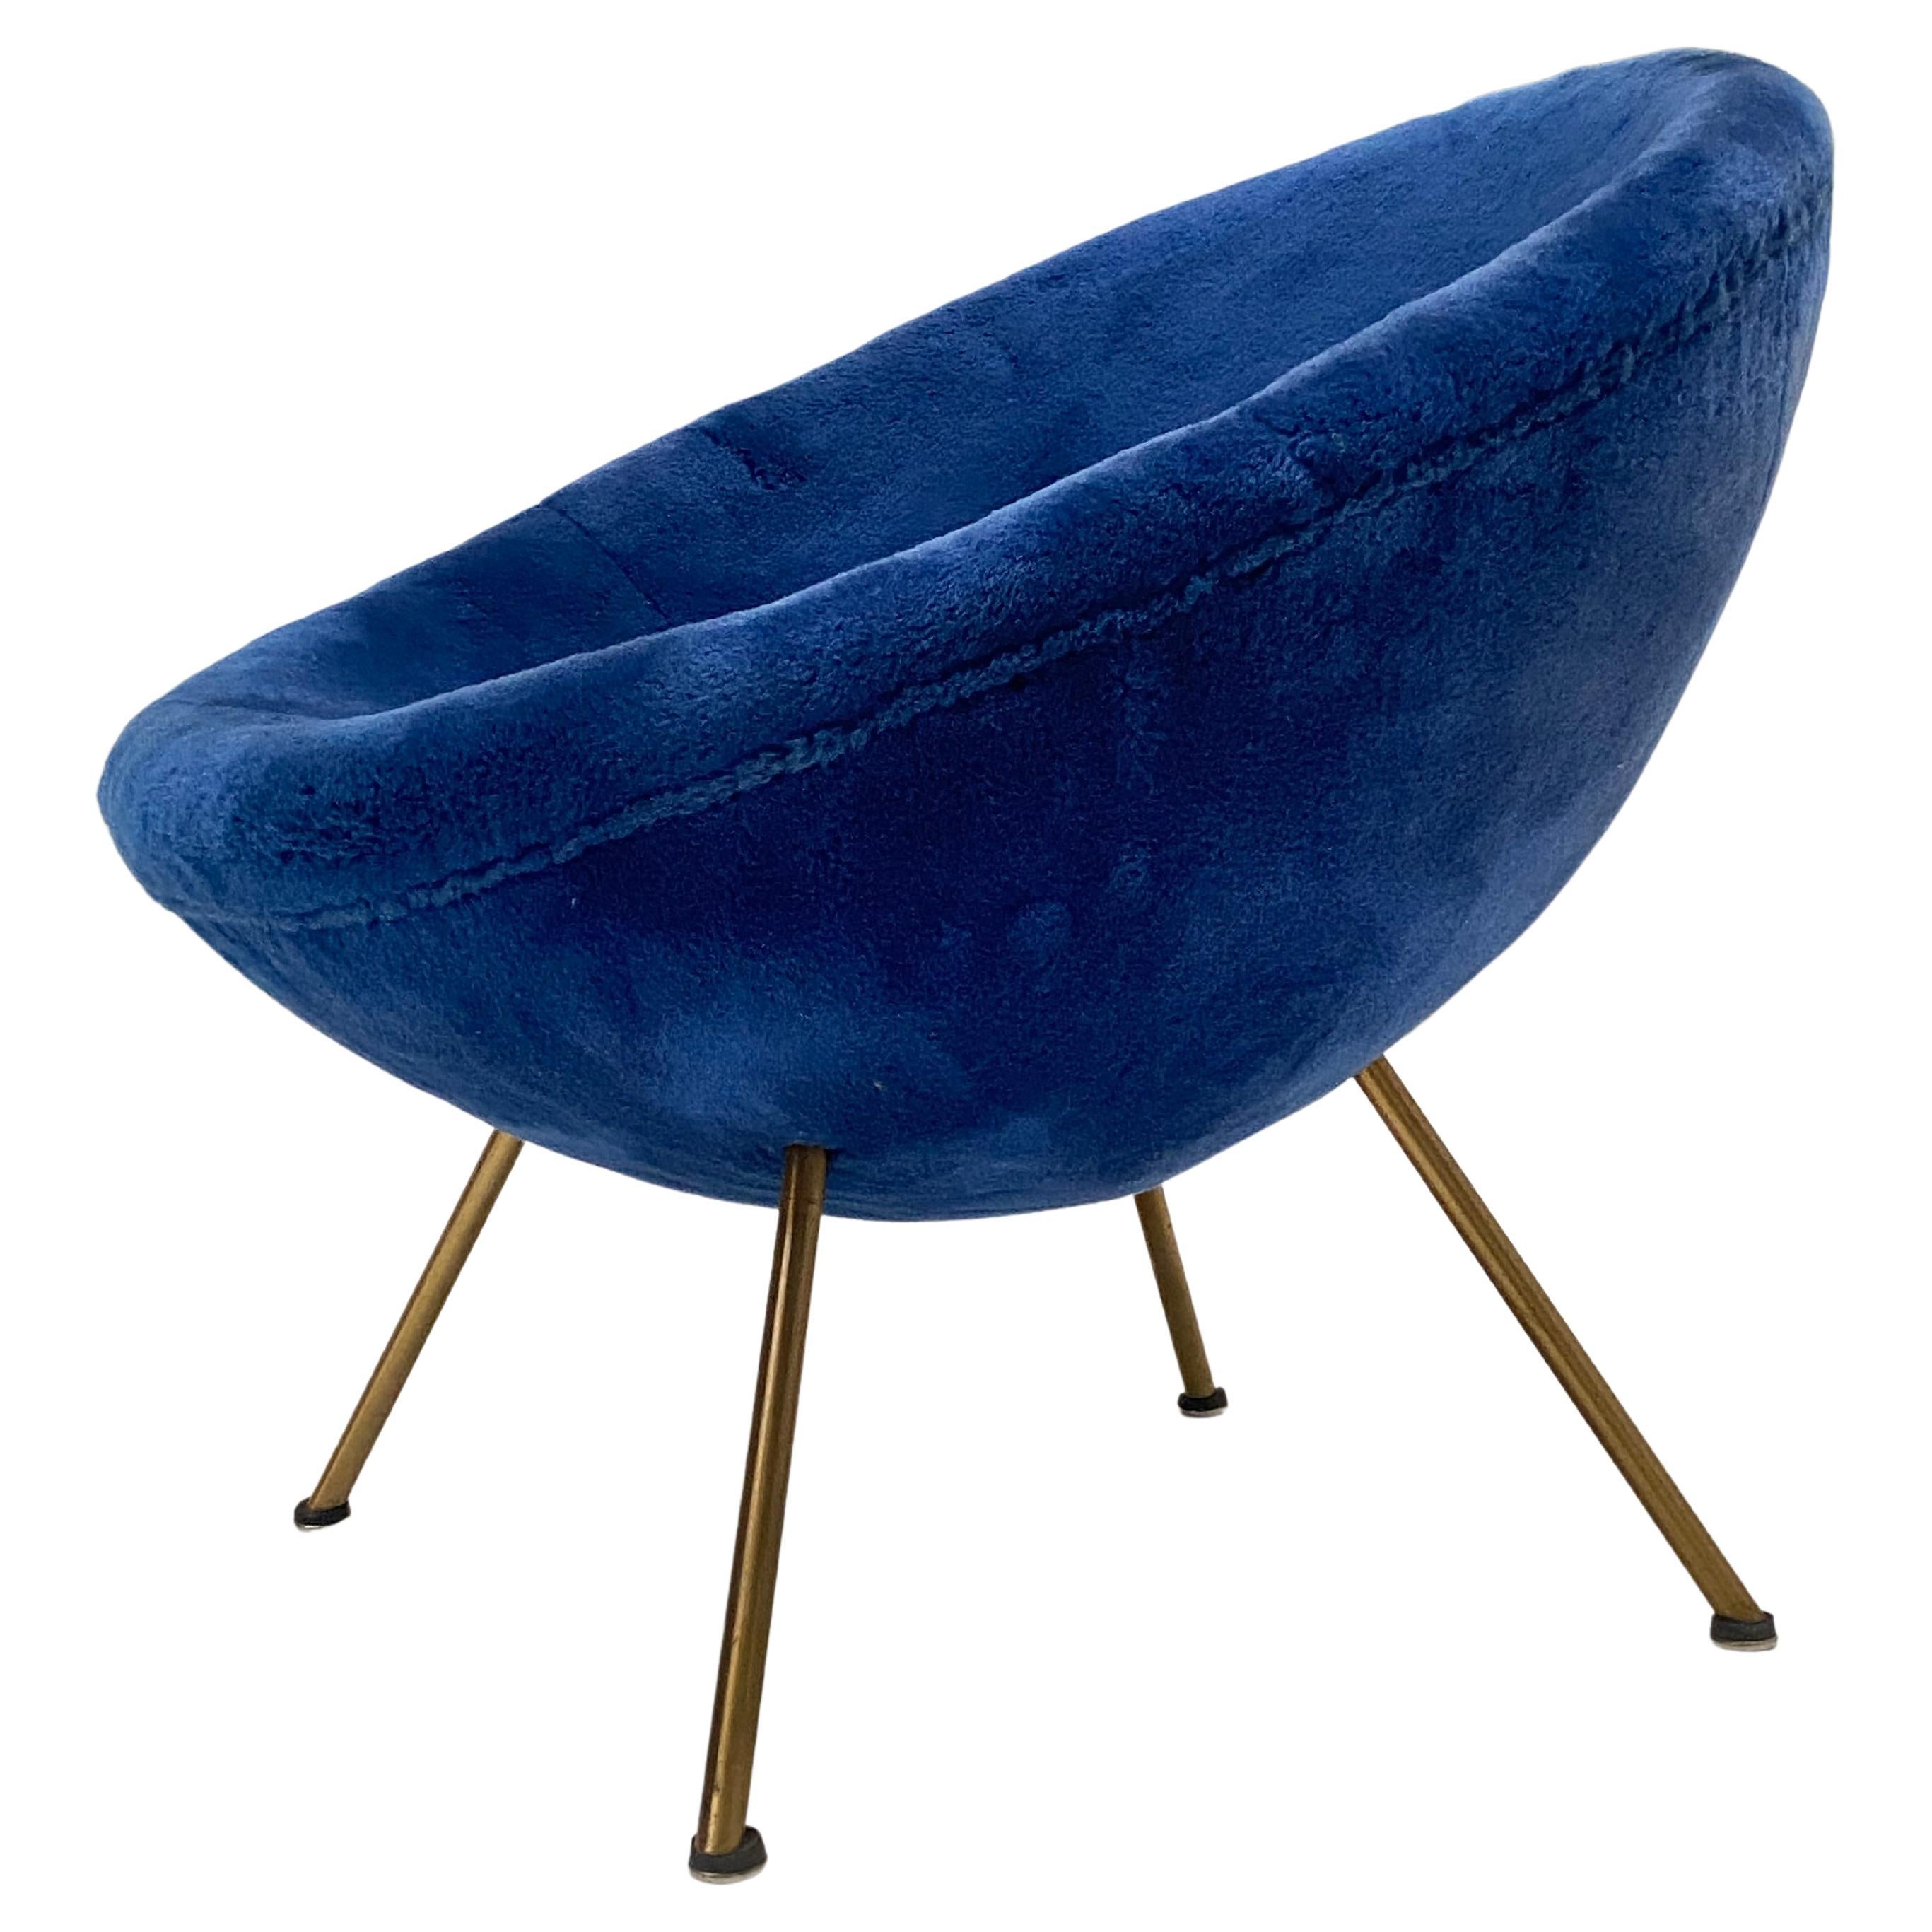 Fritz Neth Lounge Chair for Correcta Germany 1950's

Original high pile upholstery fabric in a deep blue with brass legs

Nice original as found condition